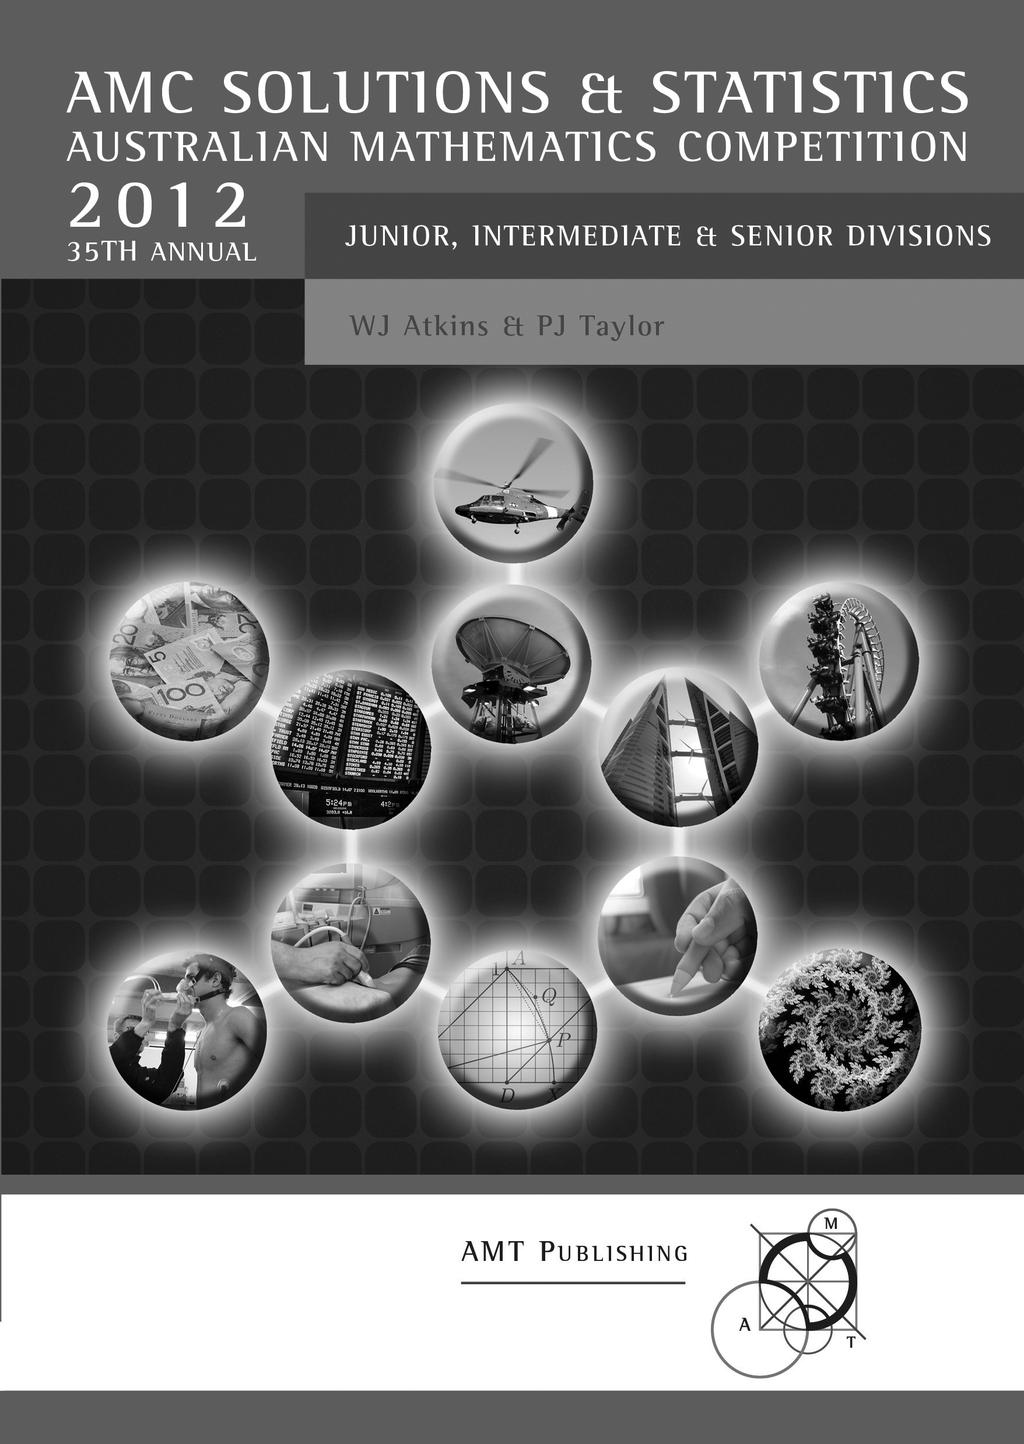 AMC SOLUTIONS AND STATISTICS This book provides a record of the Australian Mathematics Competition Junior, Intermediate and Senior questions, solutions and statistics for 2012 It also includes